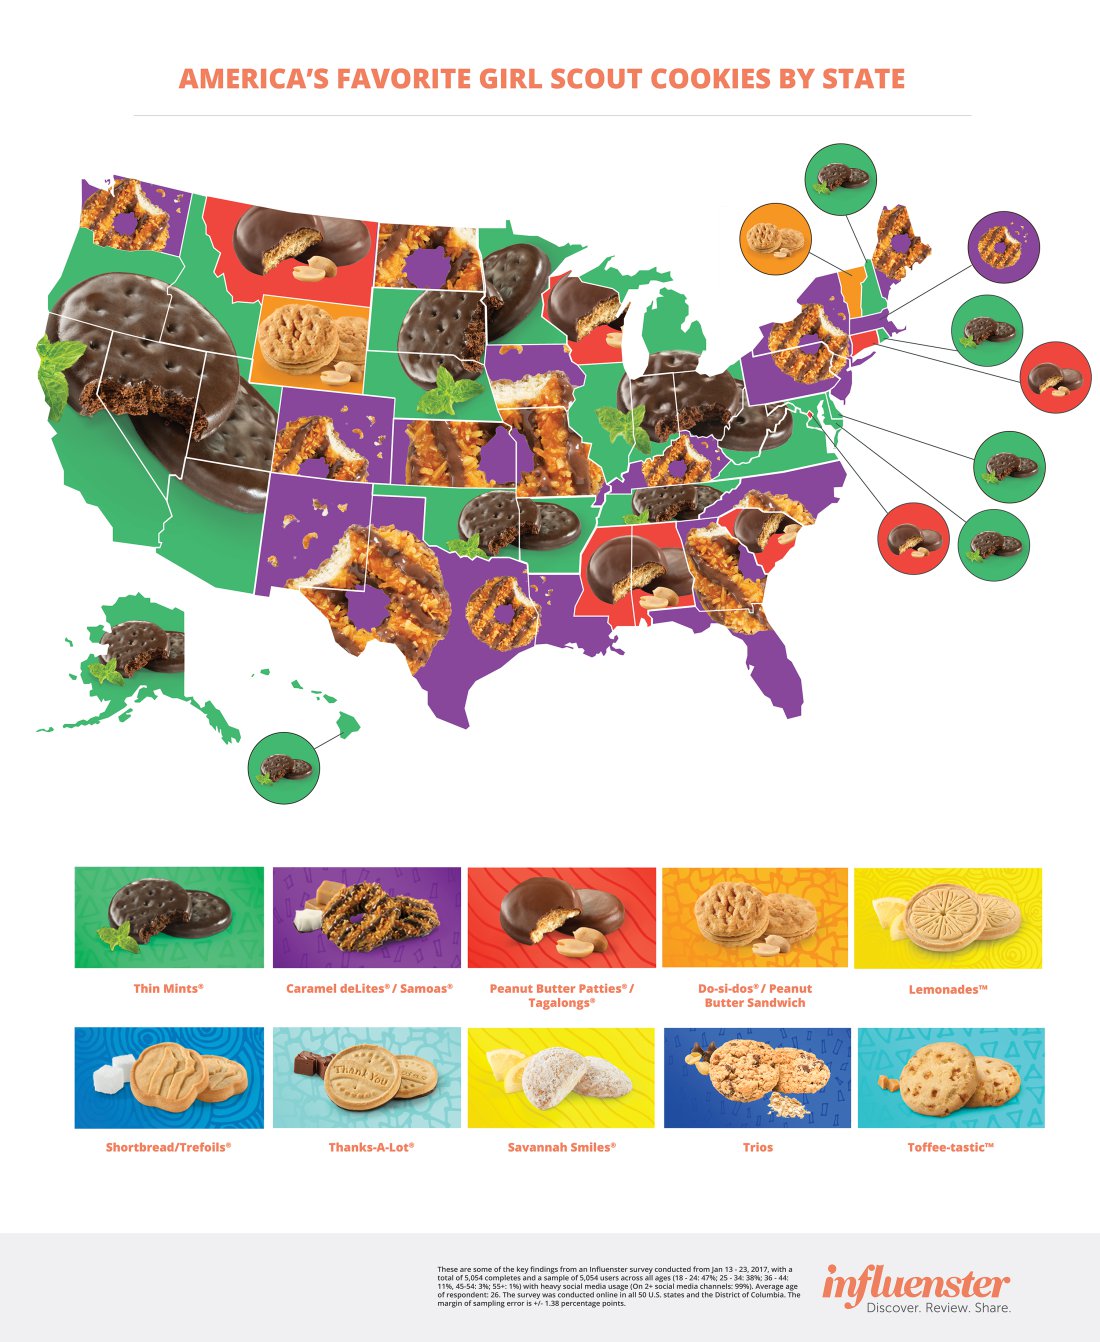 DataViz Weekly: A Map of America's Favorite Girl Scout Cookies By State